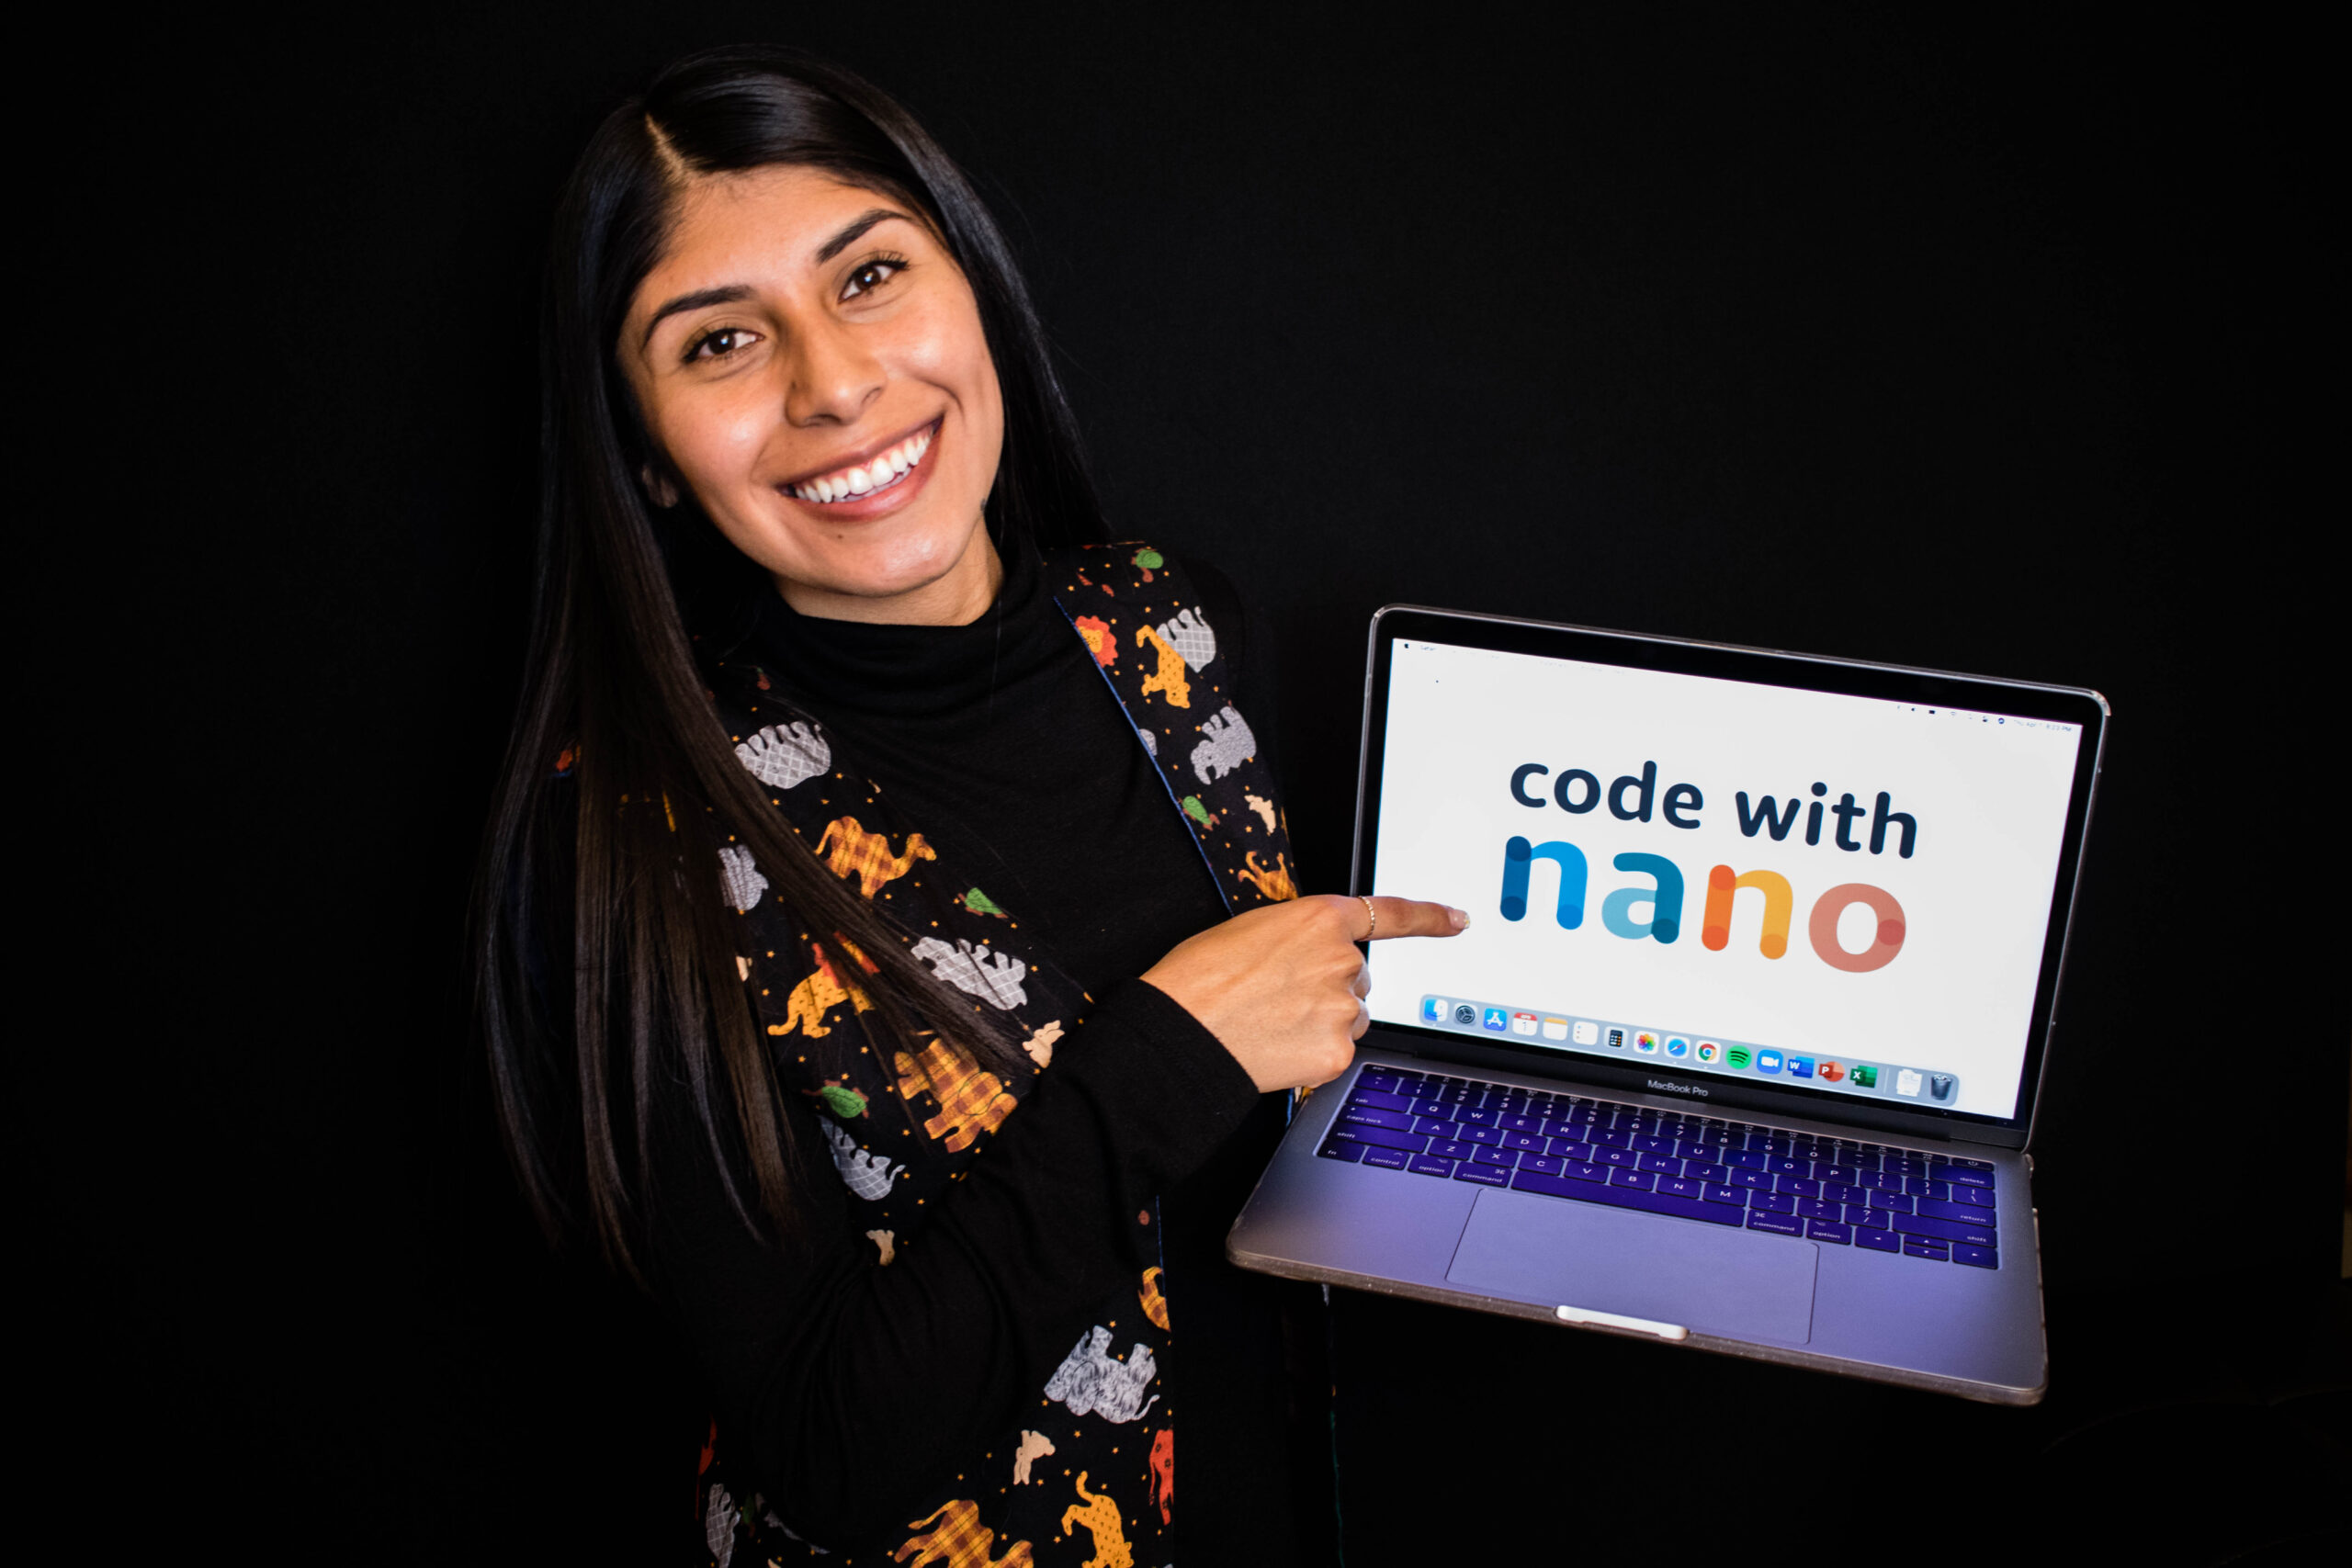 Monica Say from code with nano with computer